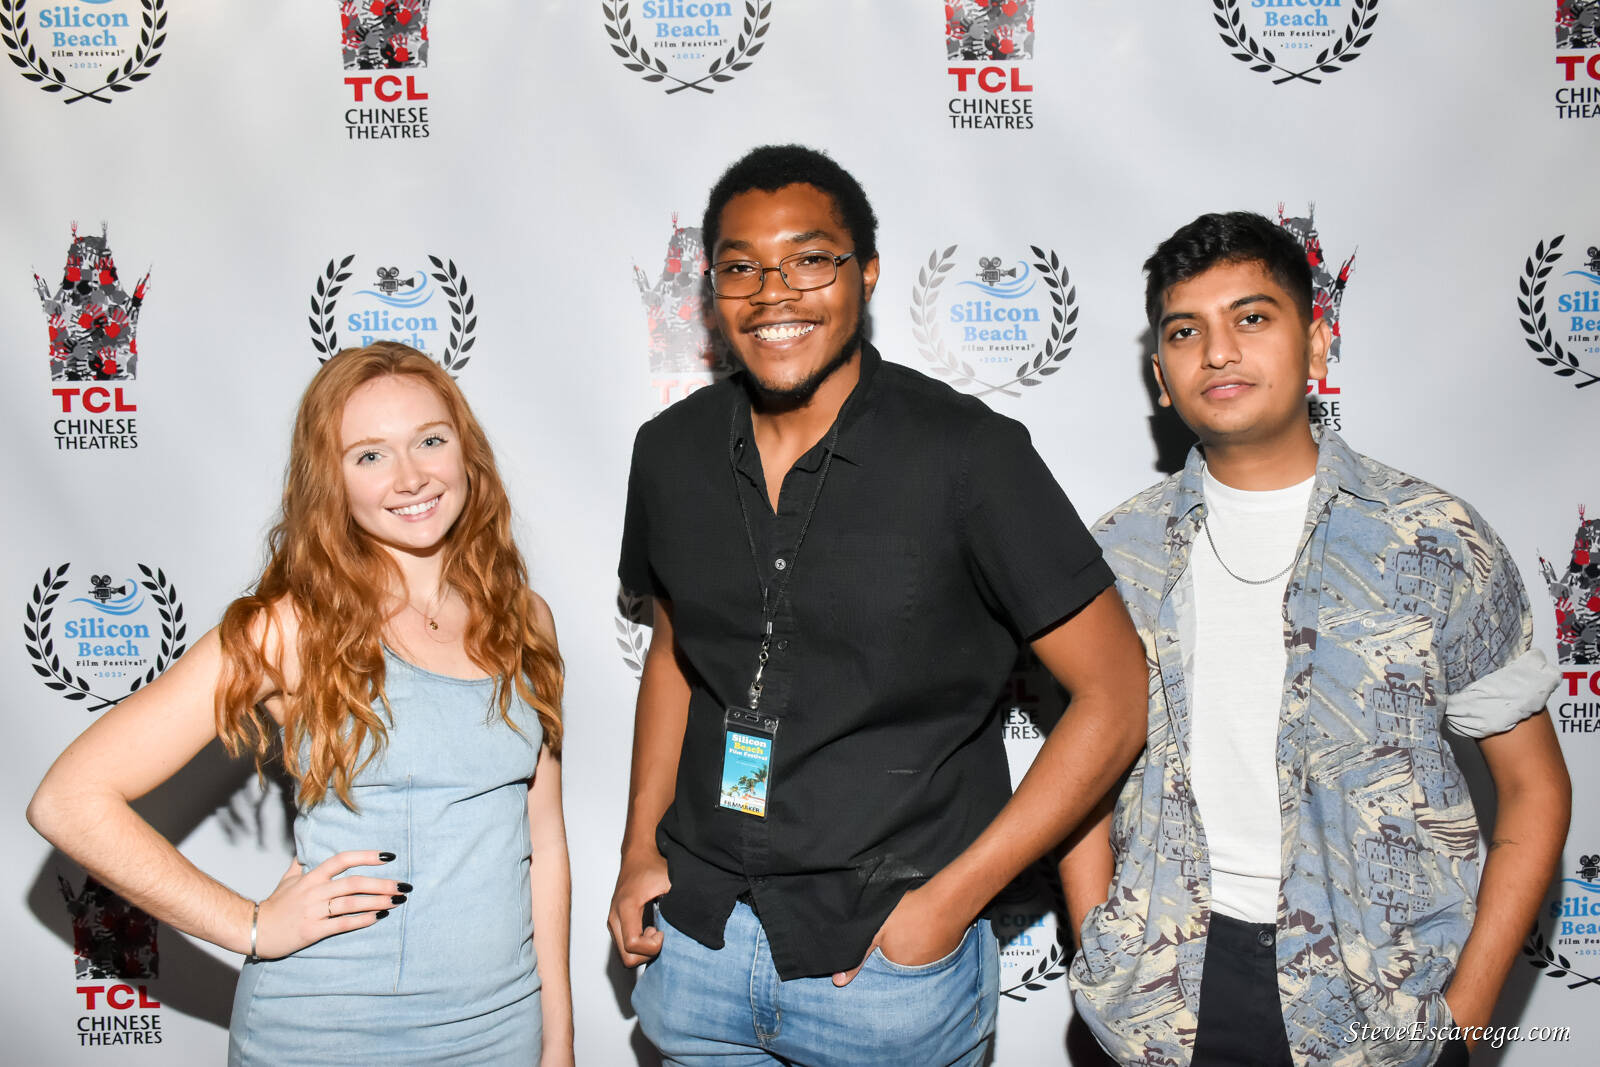 Photos courtesy of Myles Ross
Myles Ross (center) stands with “The House” actors Emily Gateley (left) and Sagar Surana at the 2022 Silicon Beach Film Festival in Hollywood where the film won an award for “Best Ensemble.”